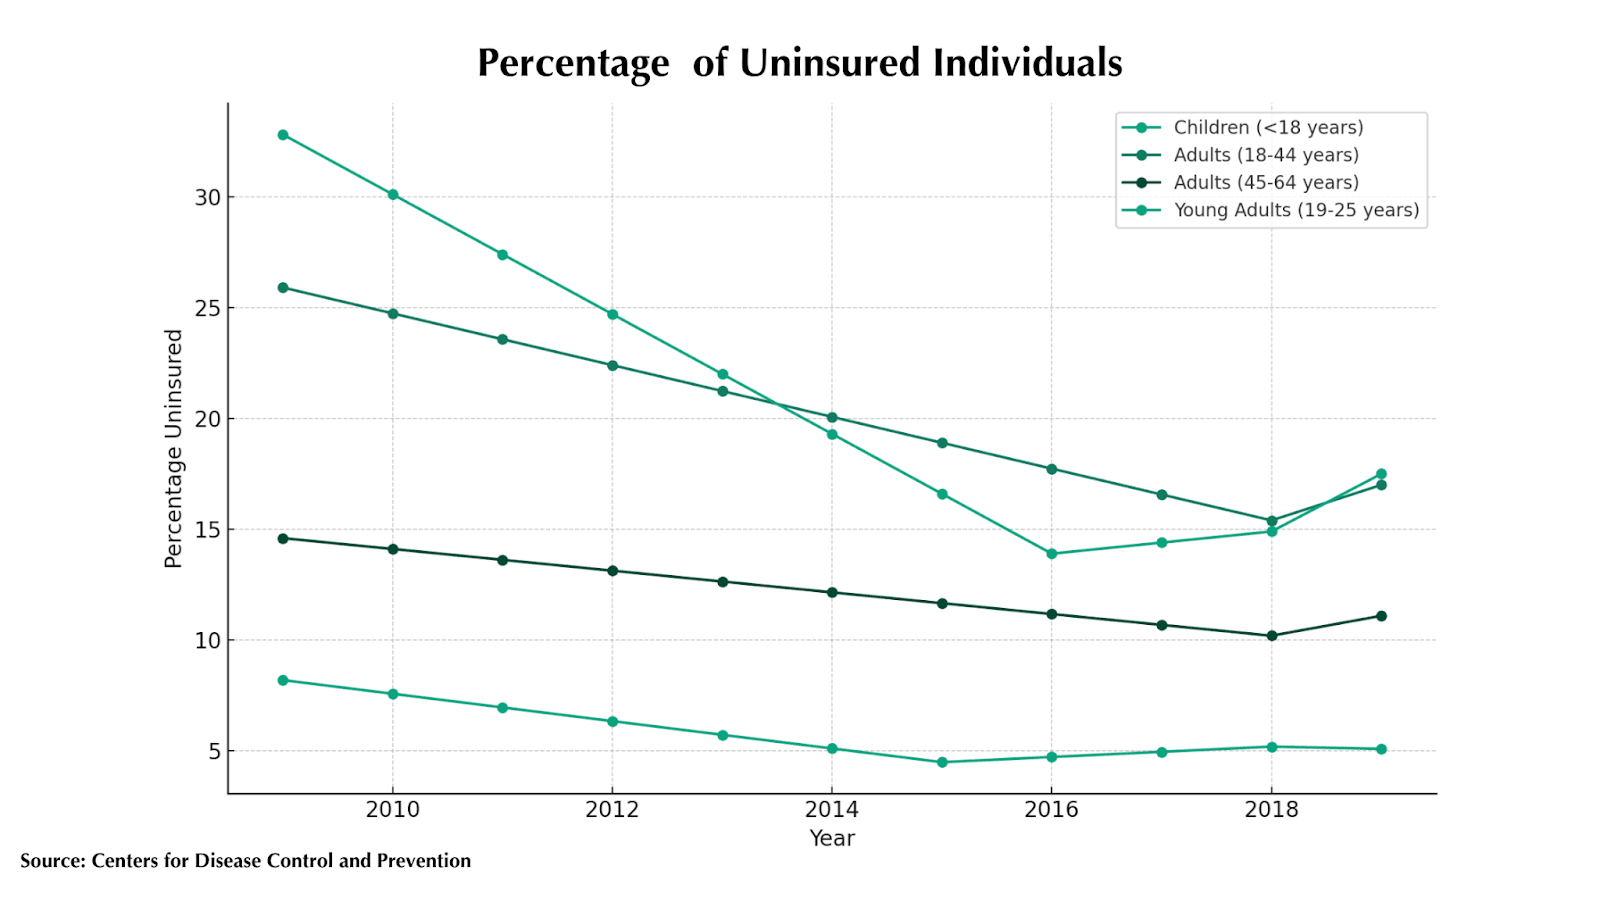 fluctuations in the percentage of people lacking health insurance coverage categorized by age